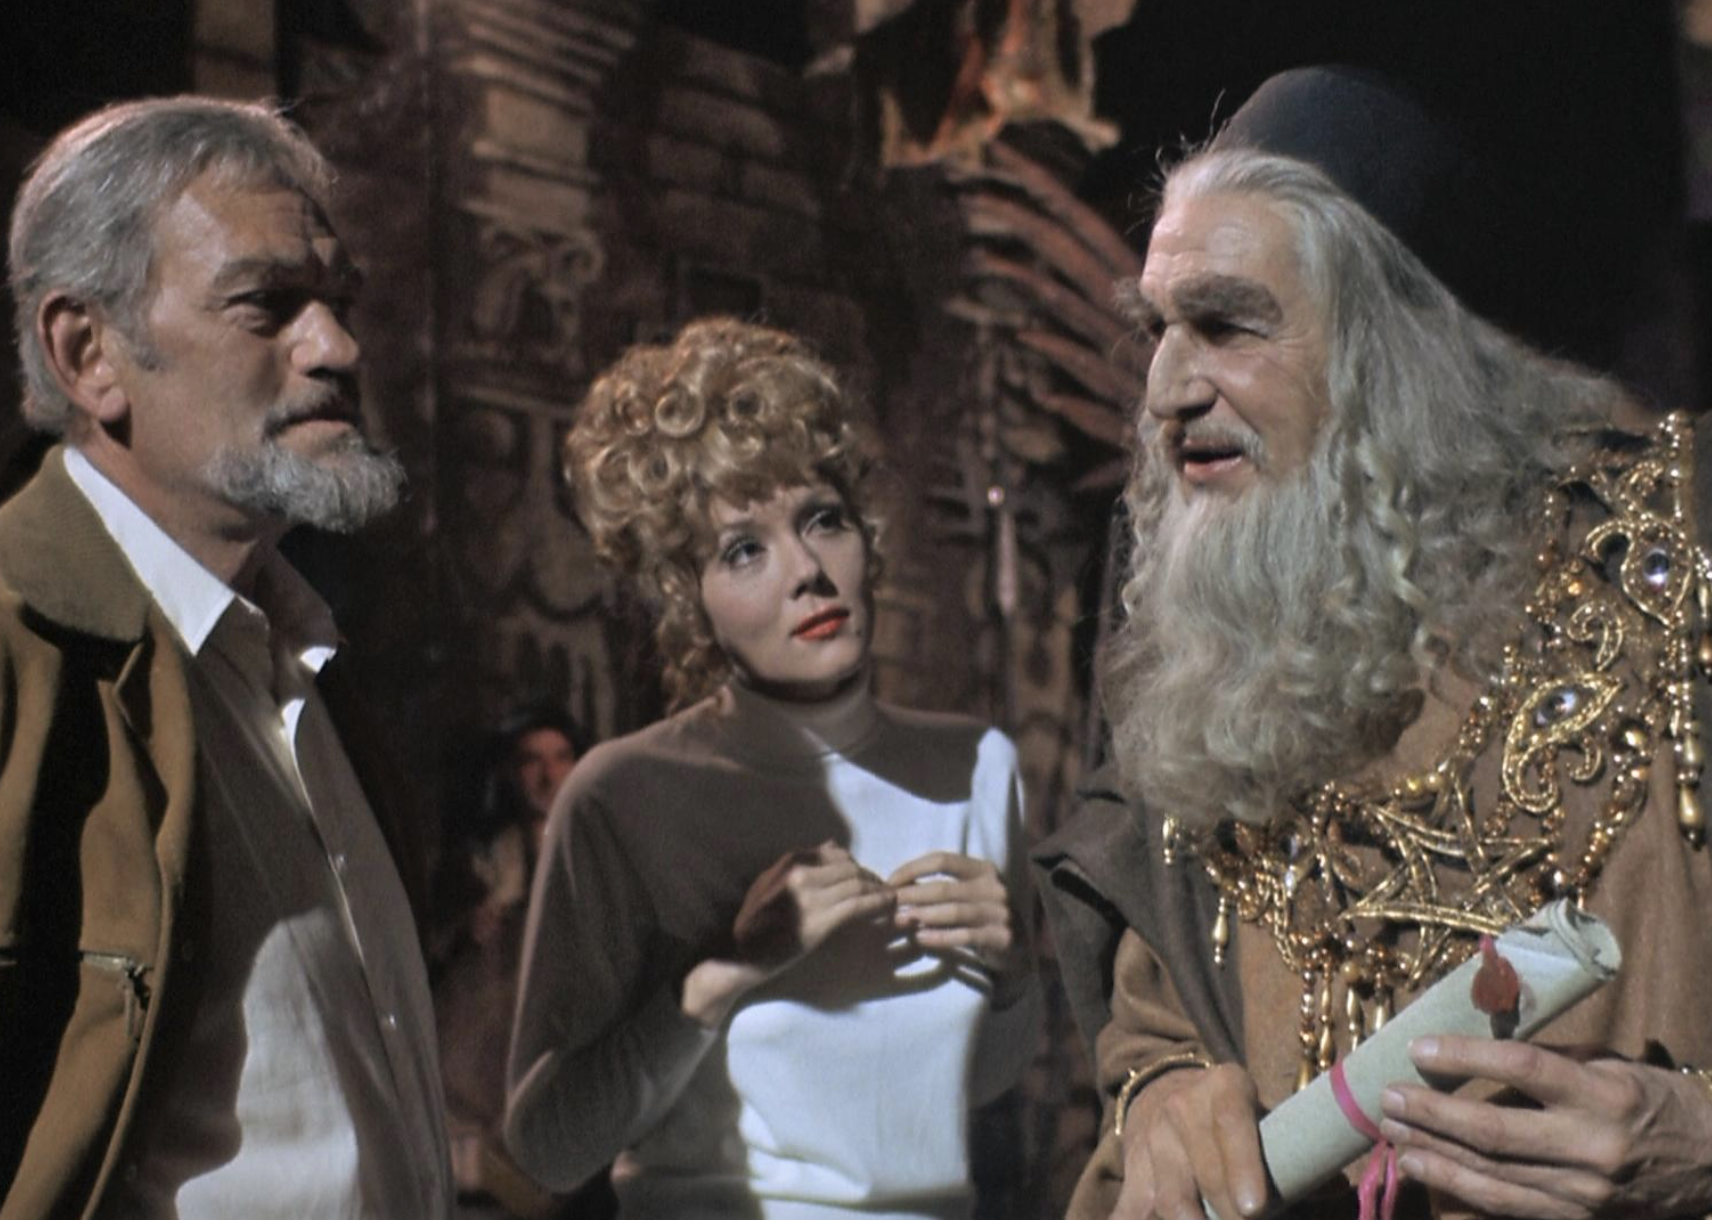 Vincent Price, Diana Rigg, and Harry Andrews in "Theater of Blood".